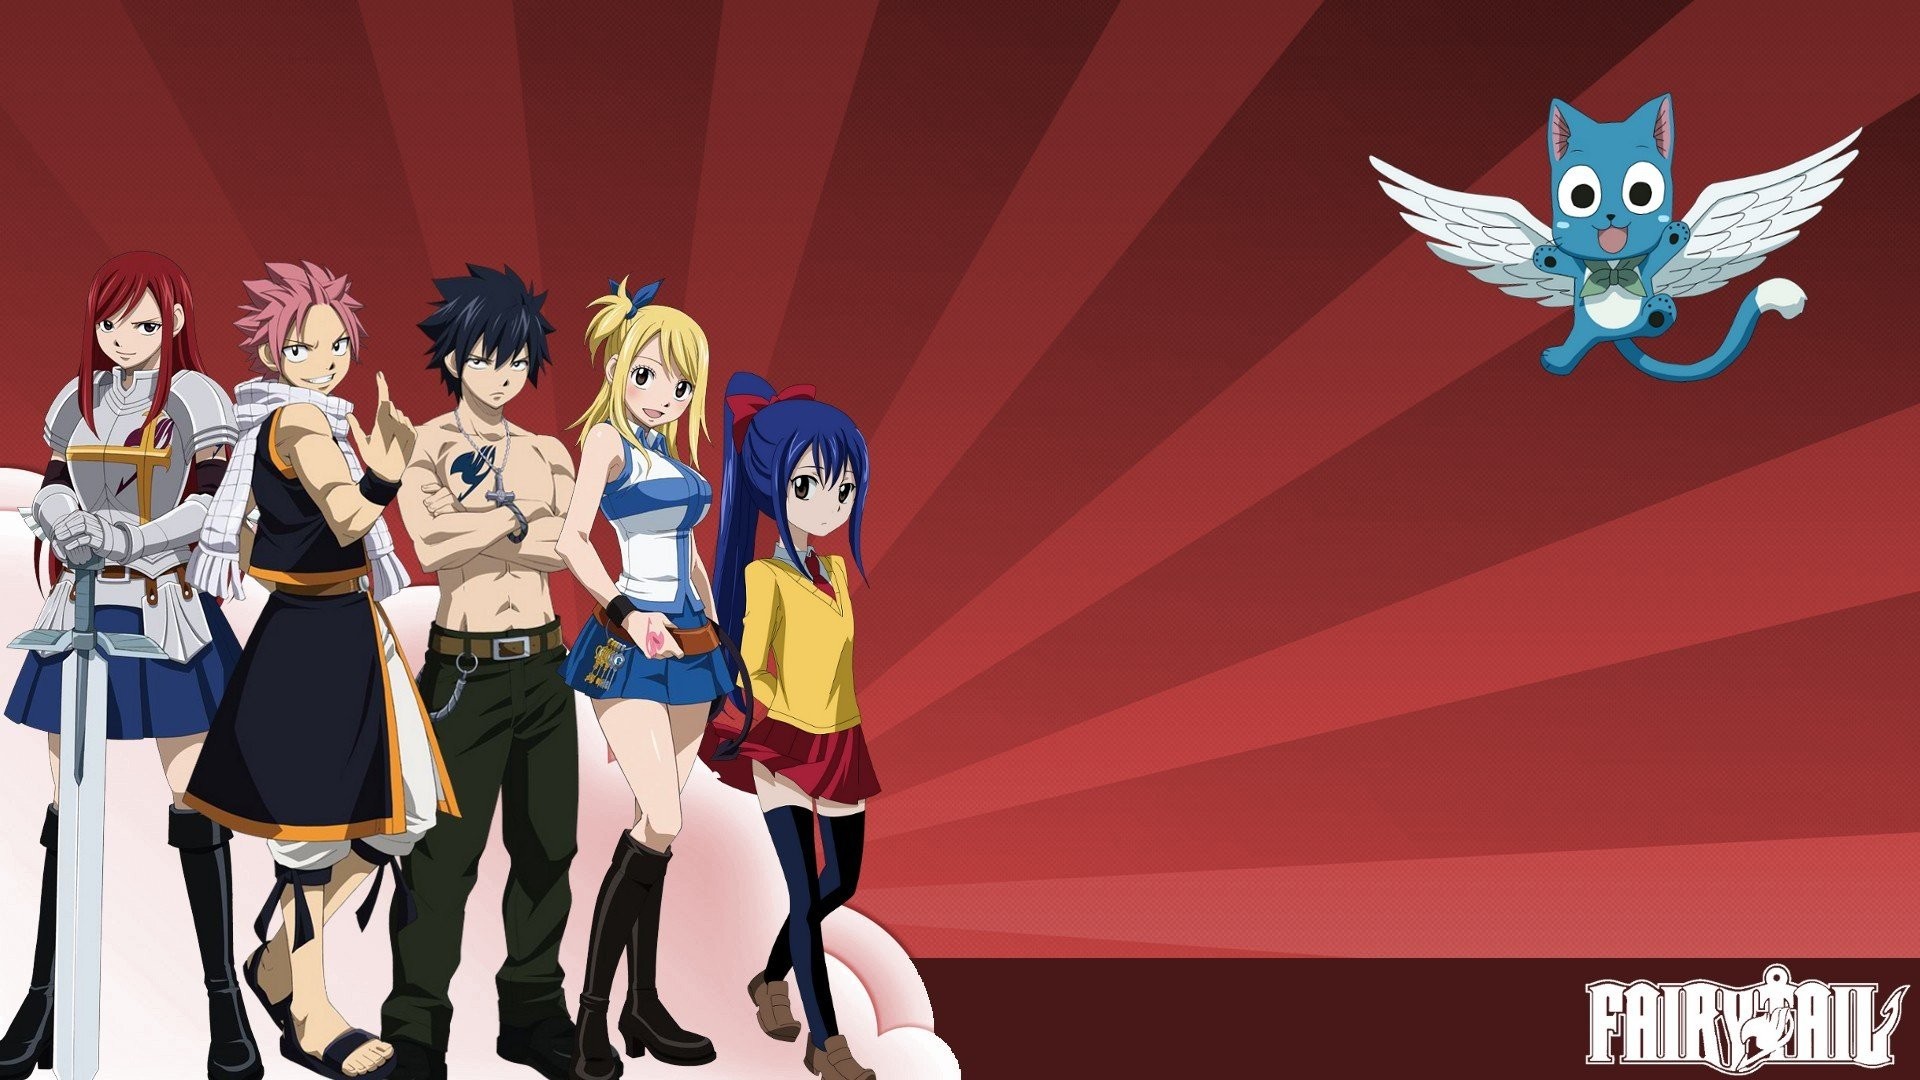 1920x1080 Fairy Tail Scarlet Erza Dragneel Natsu Fullbuster Gray Heartfilia Lucy  Marvell Wendy